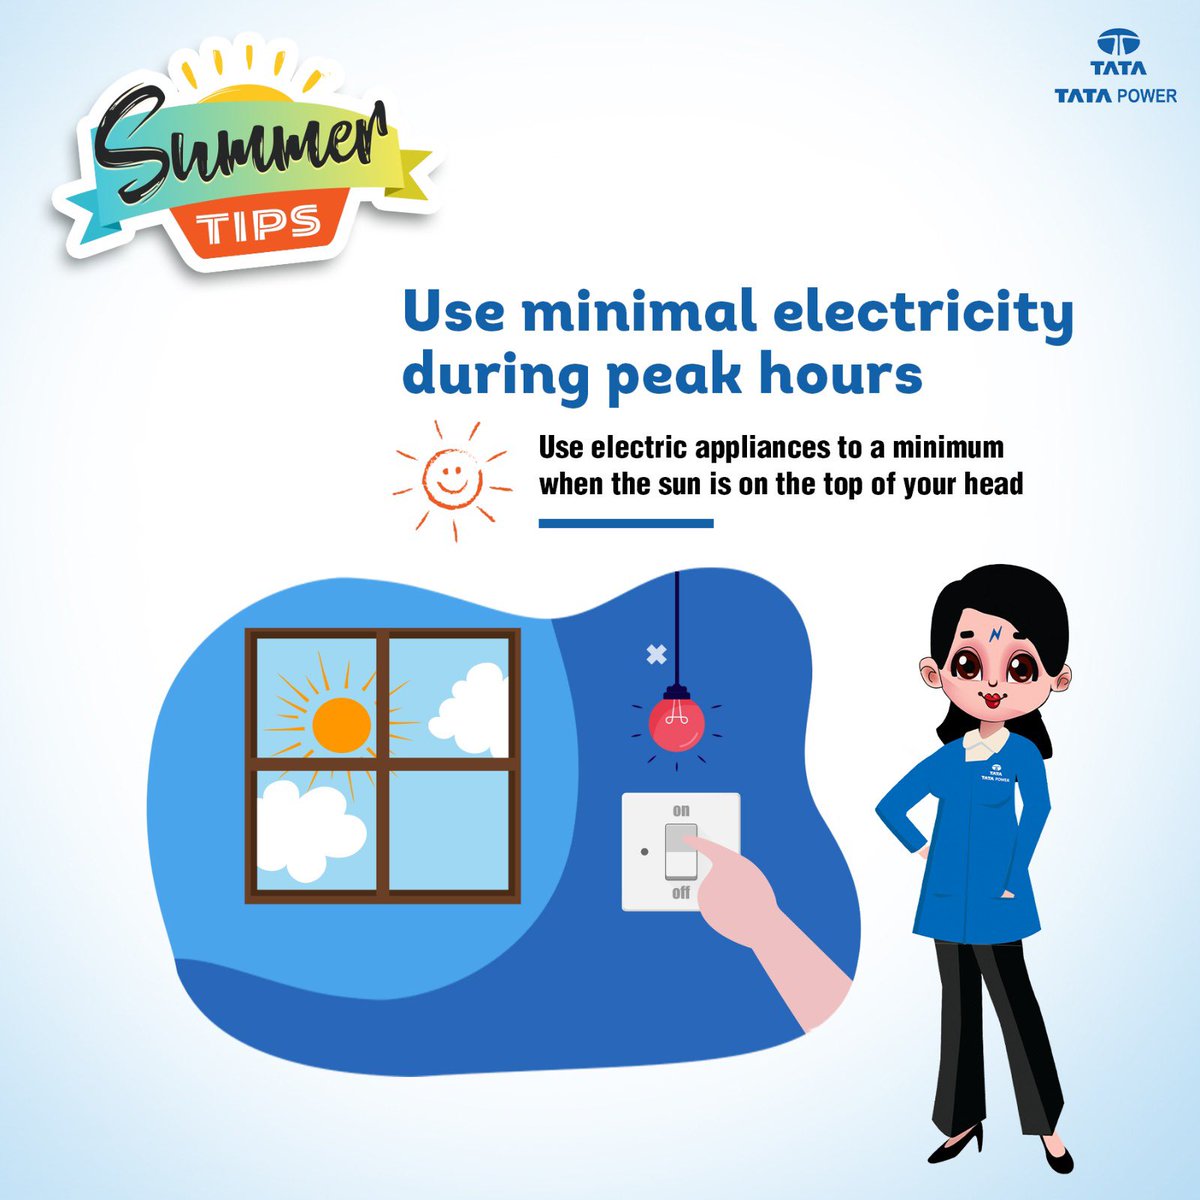 Unplug those unused electronics! Even on standby, electronics can silently drain energy. Get in the habit of unplugging chargers, TVs and other electronic devices when not in use. Small steps for a cooler planet! #TataPower #ThisIsTataPower #SummerTips #SaveElectricity…